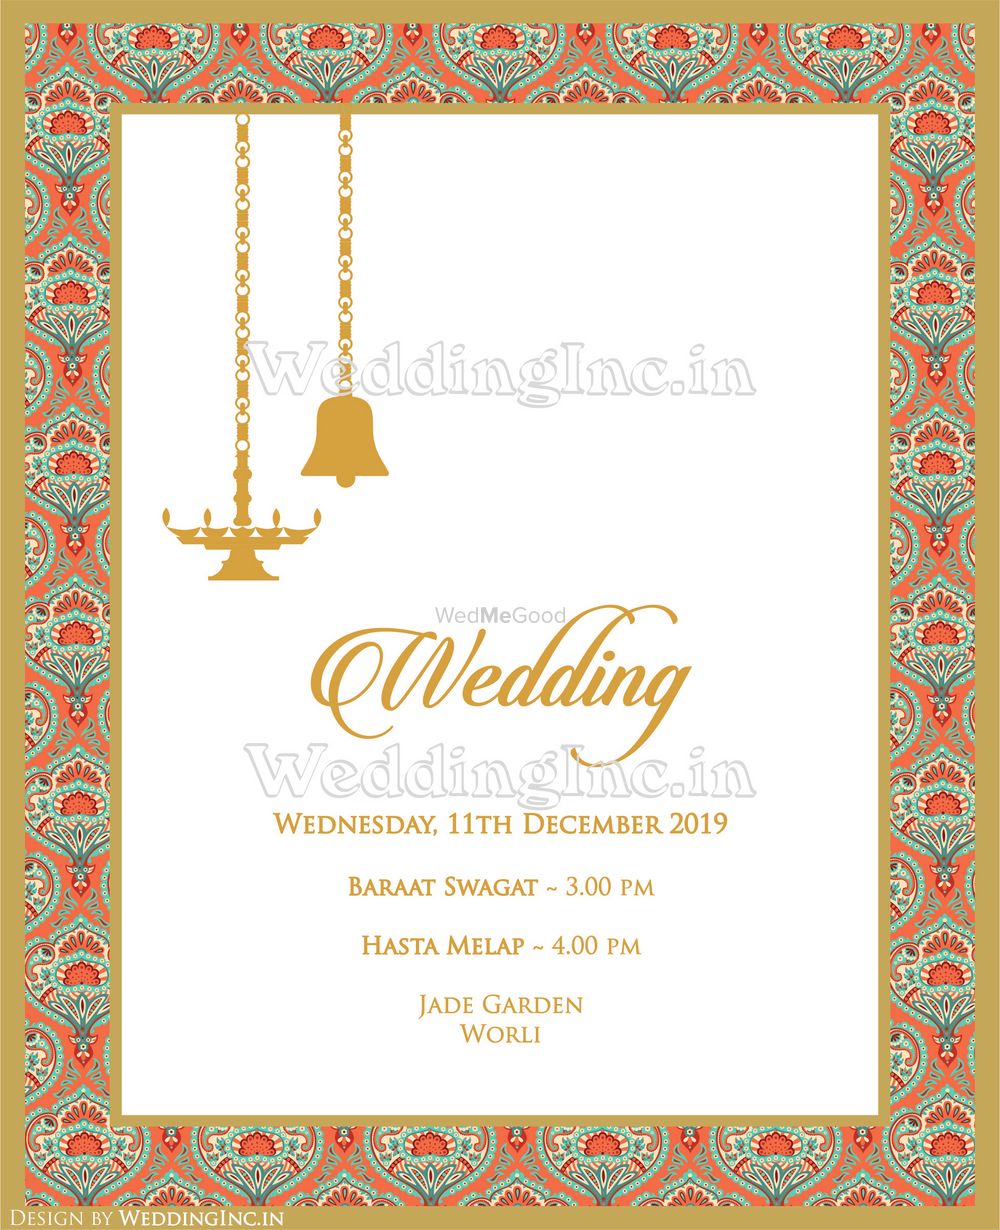 Photo From E-Invite - By Wedding Inc